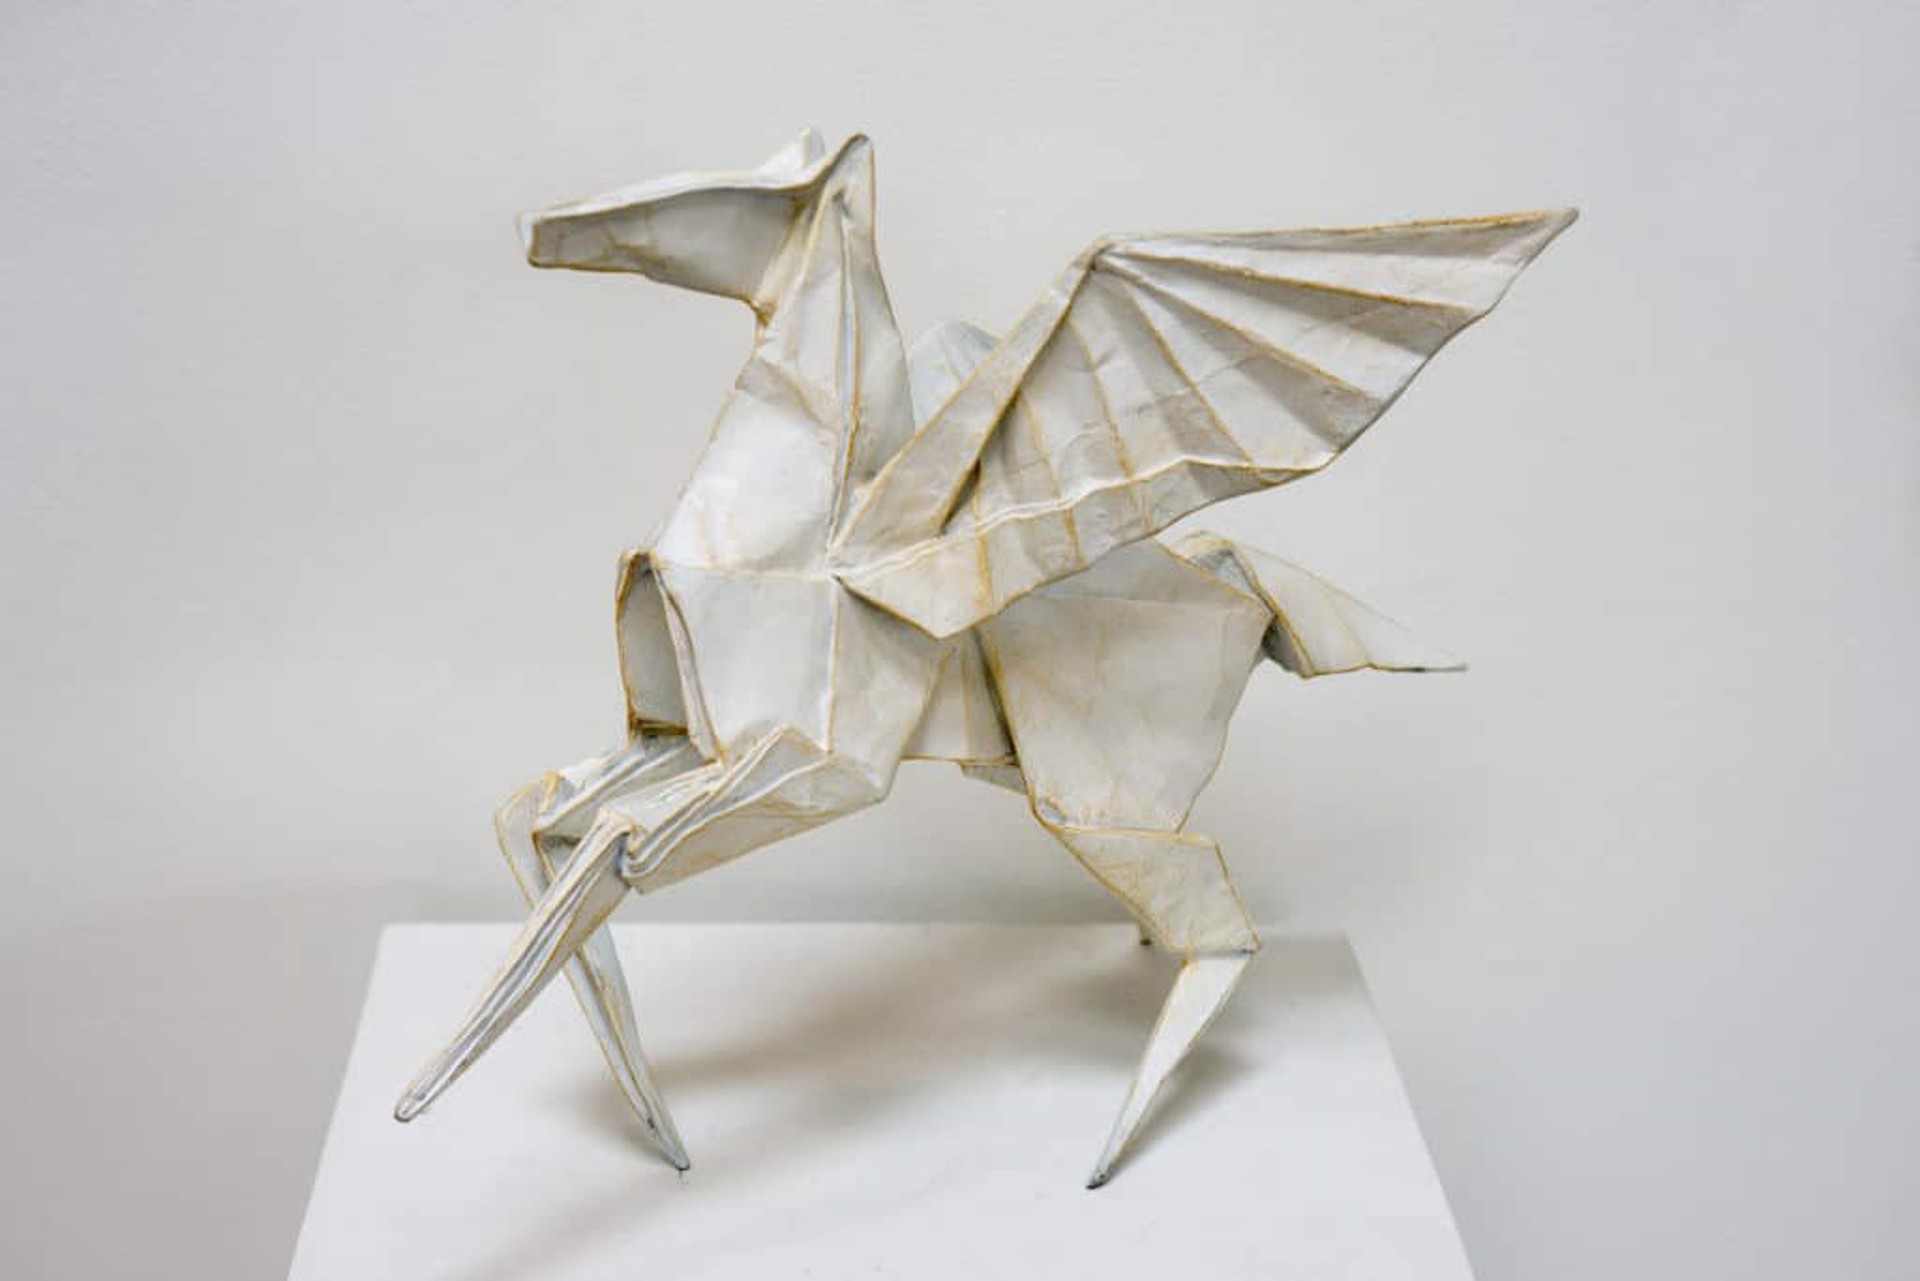 Hero's Horse (collaboration with Robert Lang) by KEVIN BOX